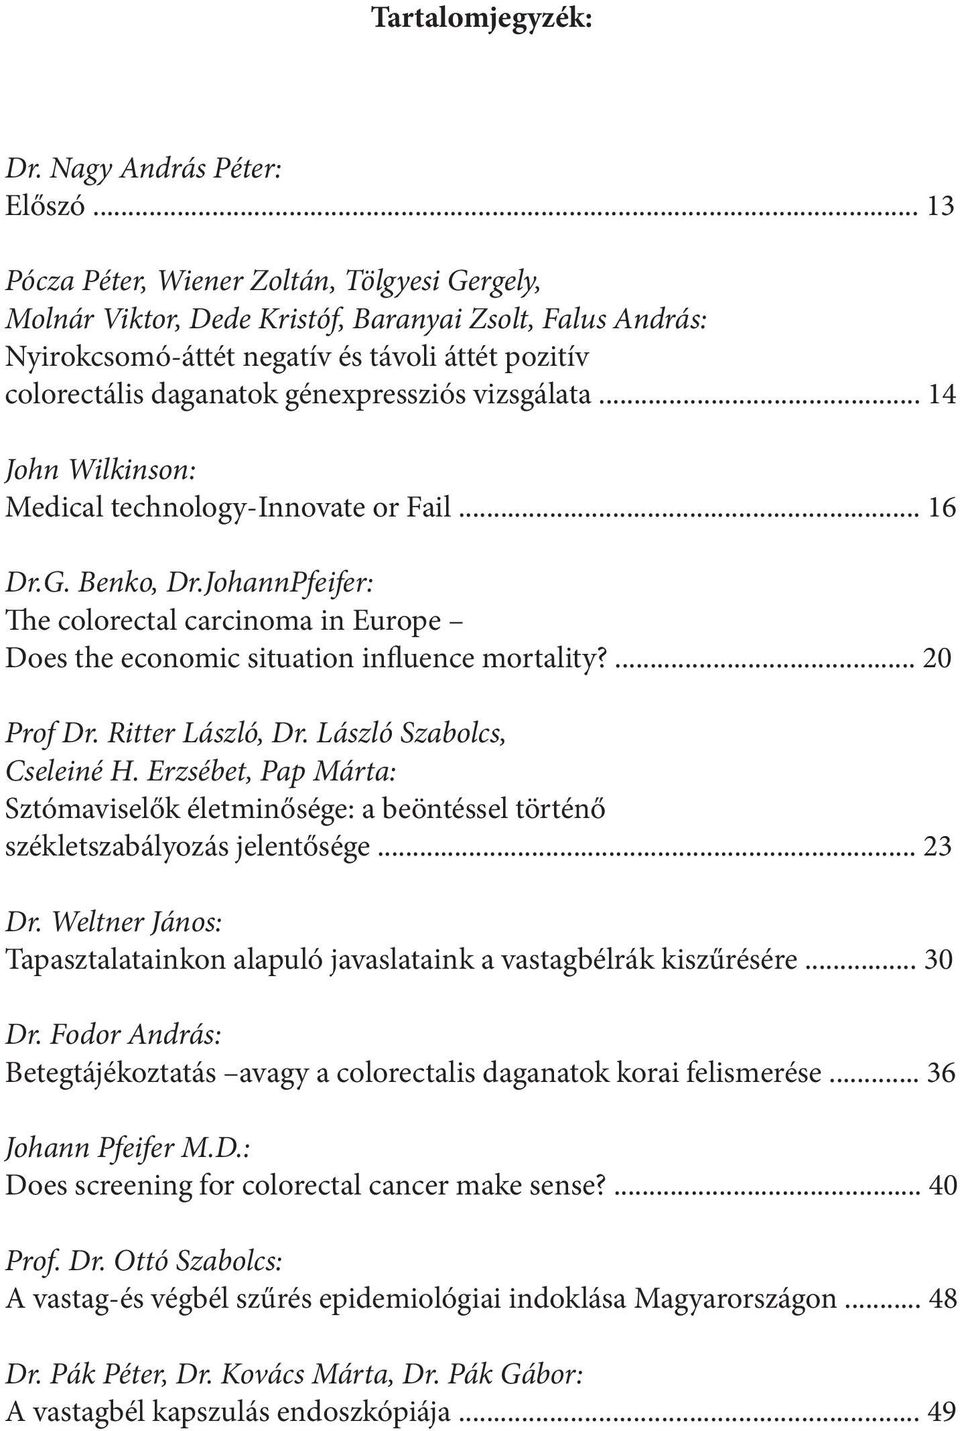 vizsgálata... 14 John Wilkinson: Medical technology-innovate or Fail... 16 Dr.G. Benko, Dr.JohannPfeifer: The colorectal carcinoma in Europe Does the economic situation influence mortality?